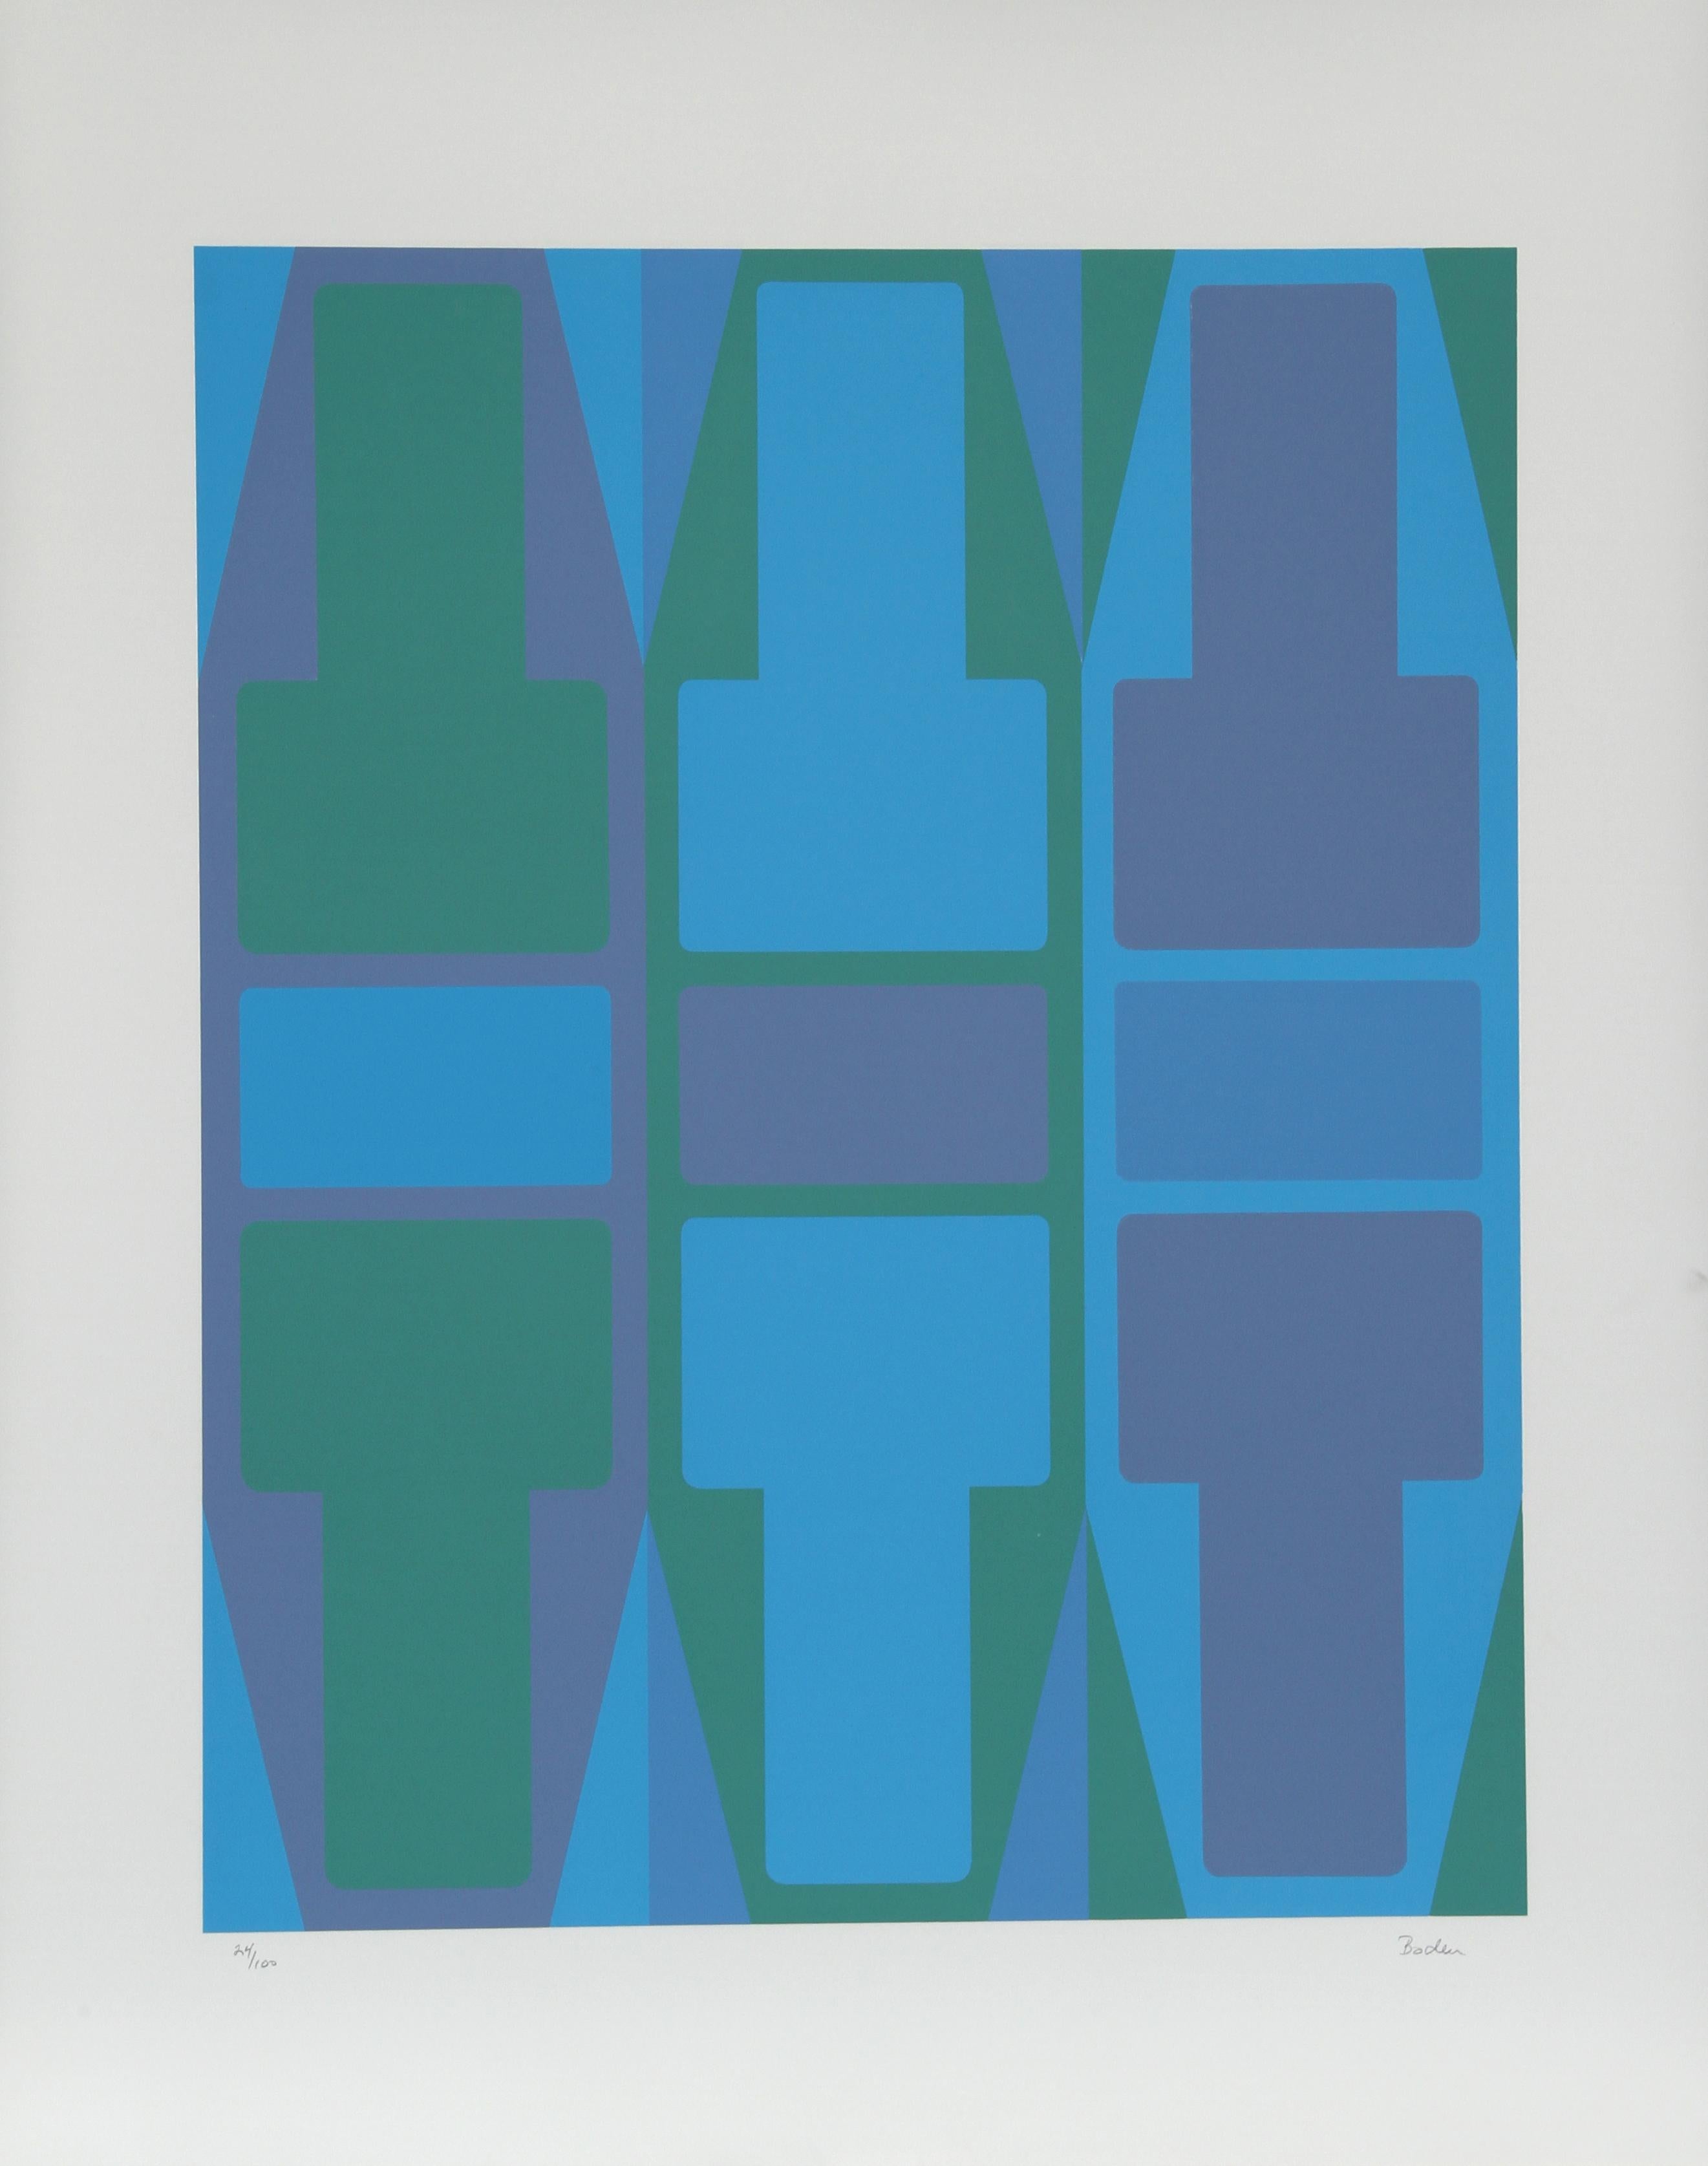 Artist: Arthur Boden, American
Title: T Series (Blue)
Year:  circa 1970
Medium:  Serigraph, signed and numbered in pencil
Edition:  100
Size:  29 in. x 23 in. (73.66 cm x 58.42 cm) 